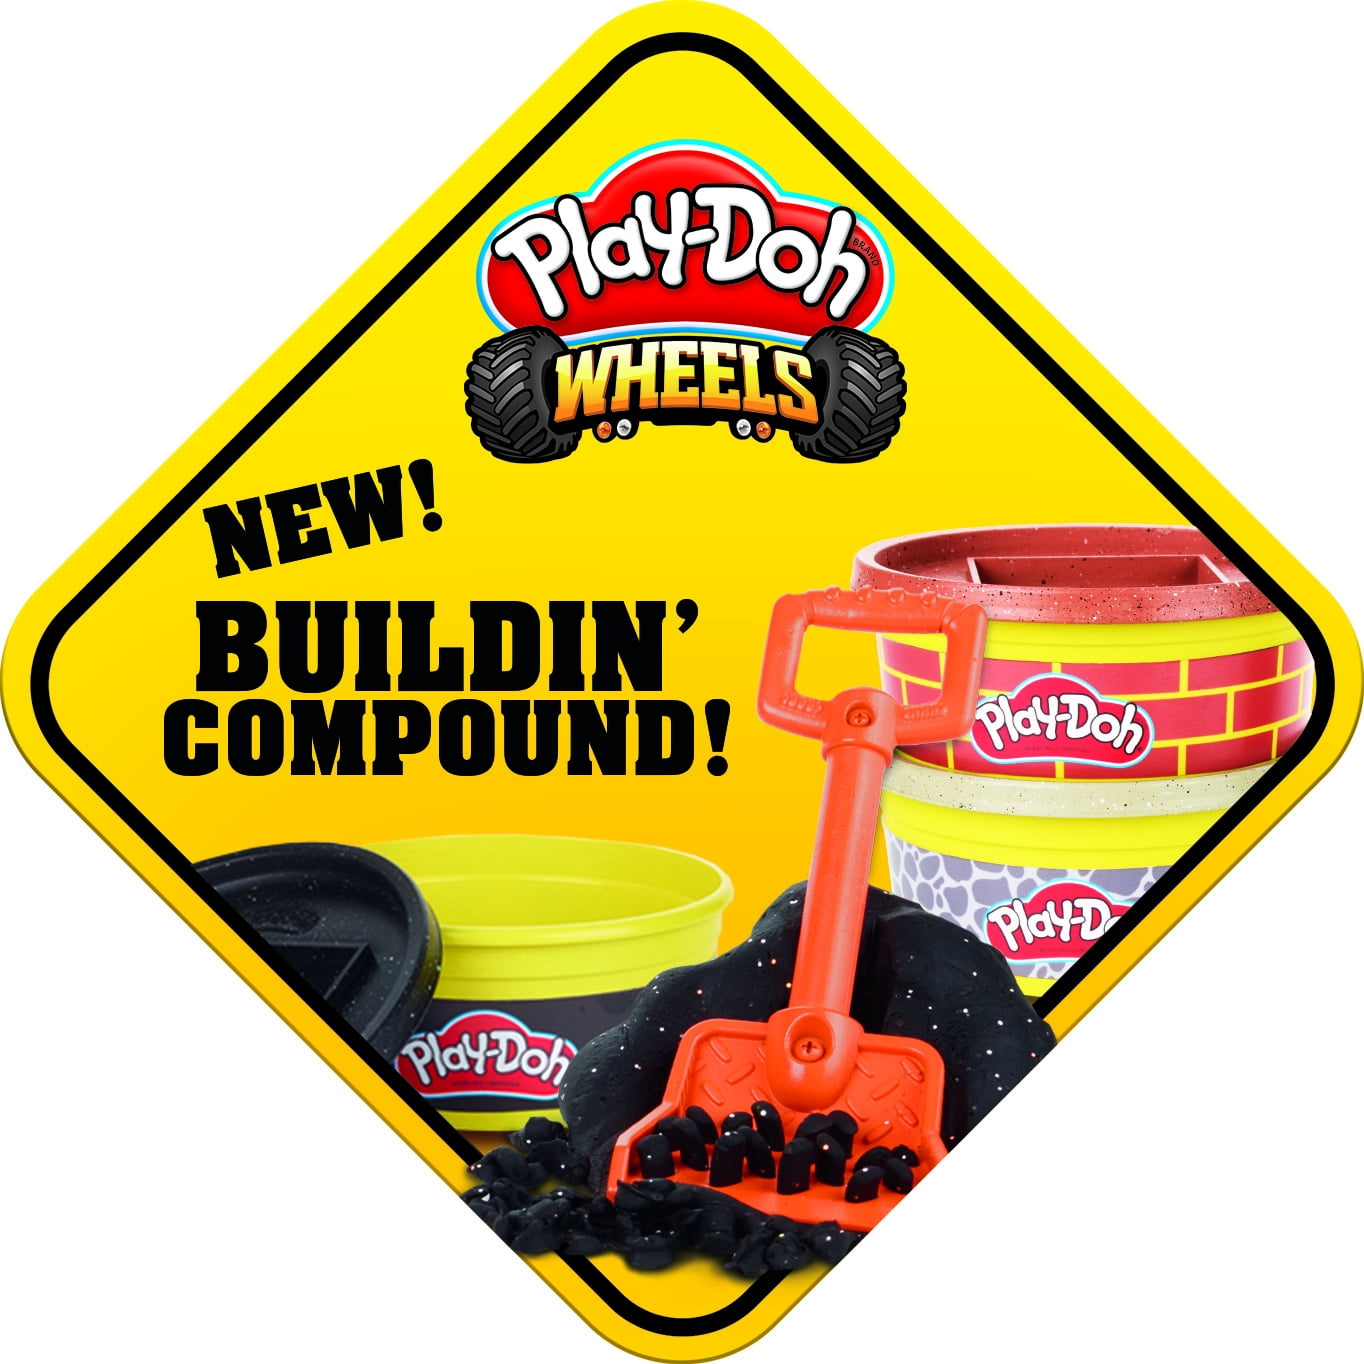 Play-Doh Wheels Buildin' Compound 4-Pack Bundle of Extra Large Cans 